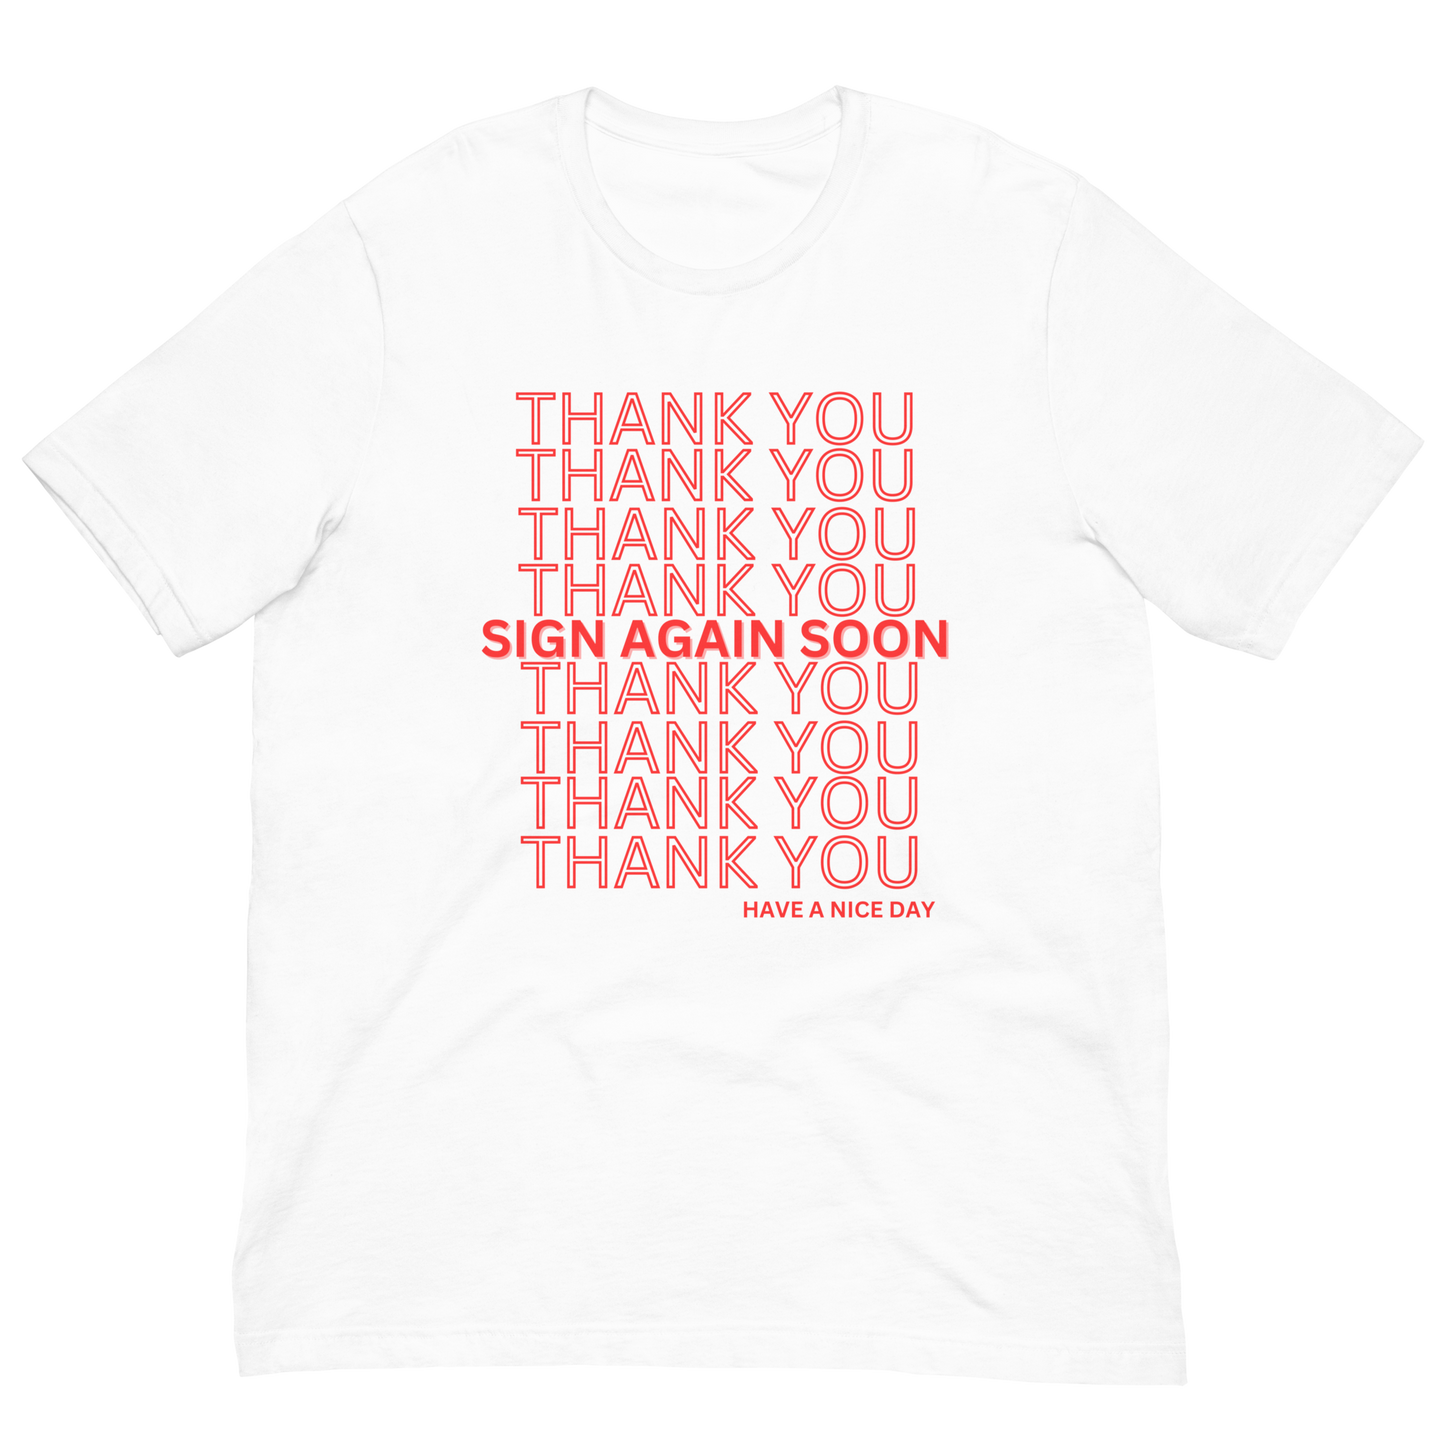 Thank You Come Sign Again Unisex T-Shirt